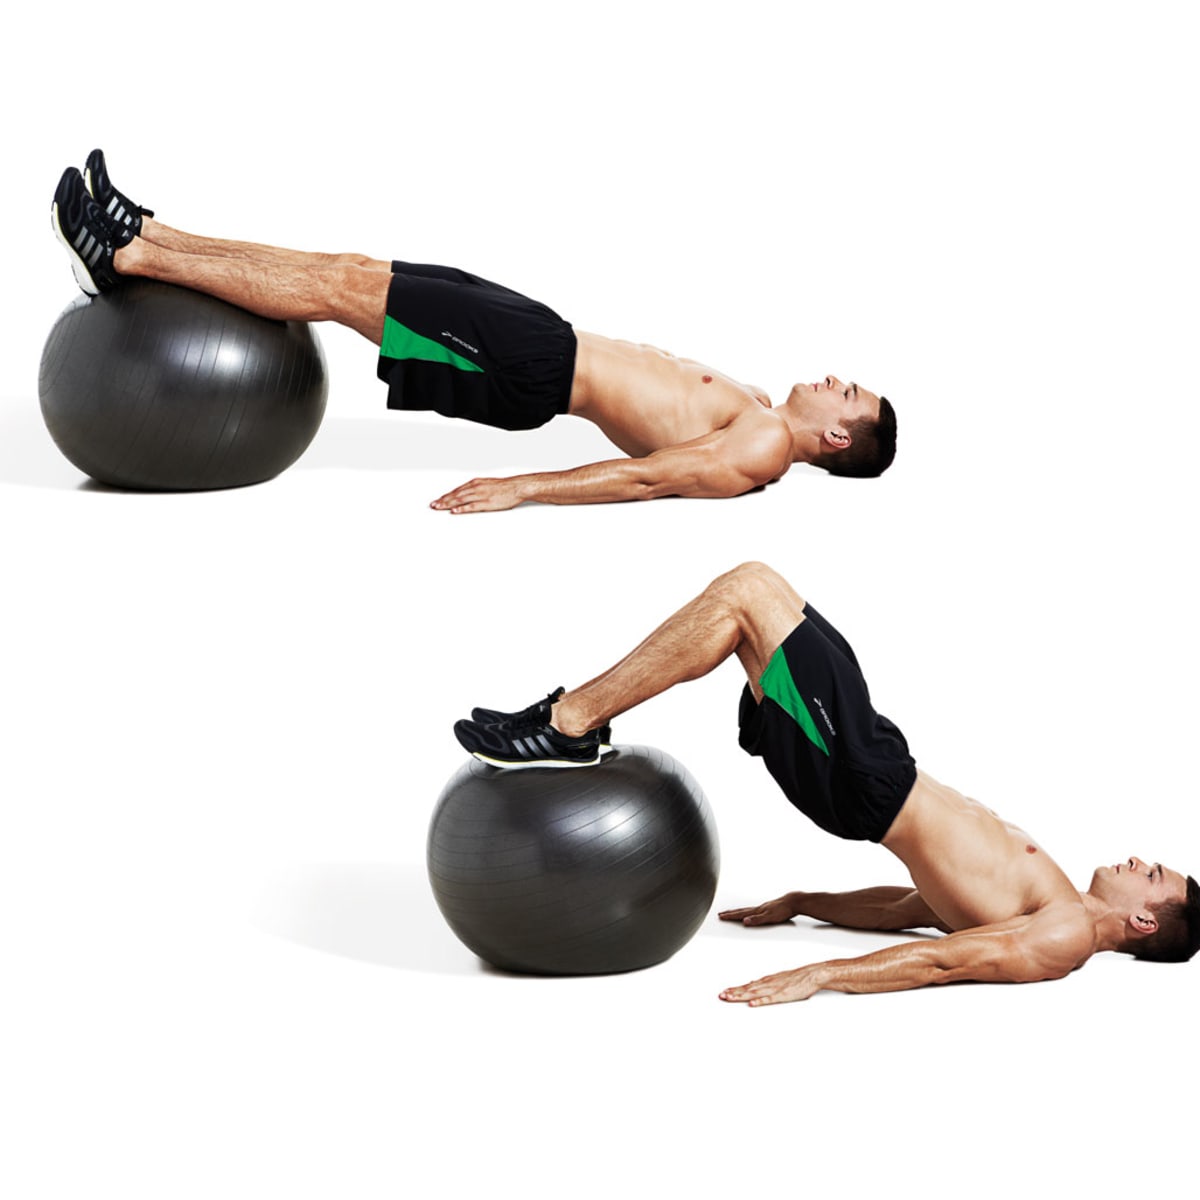 This Medicine Ball Workout Will Challenge Your Butt And Abs Like